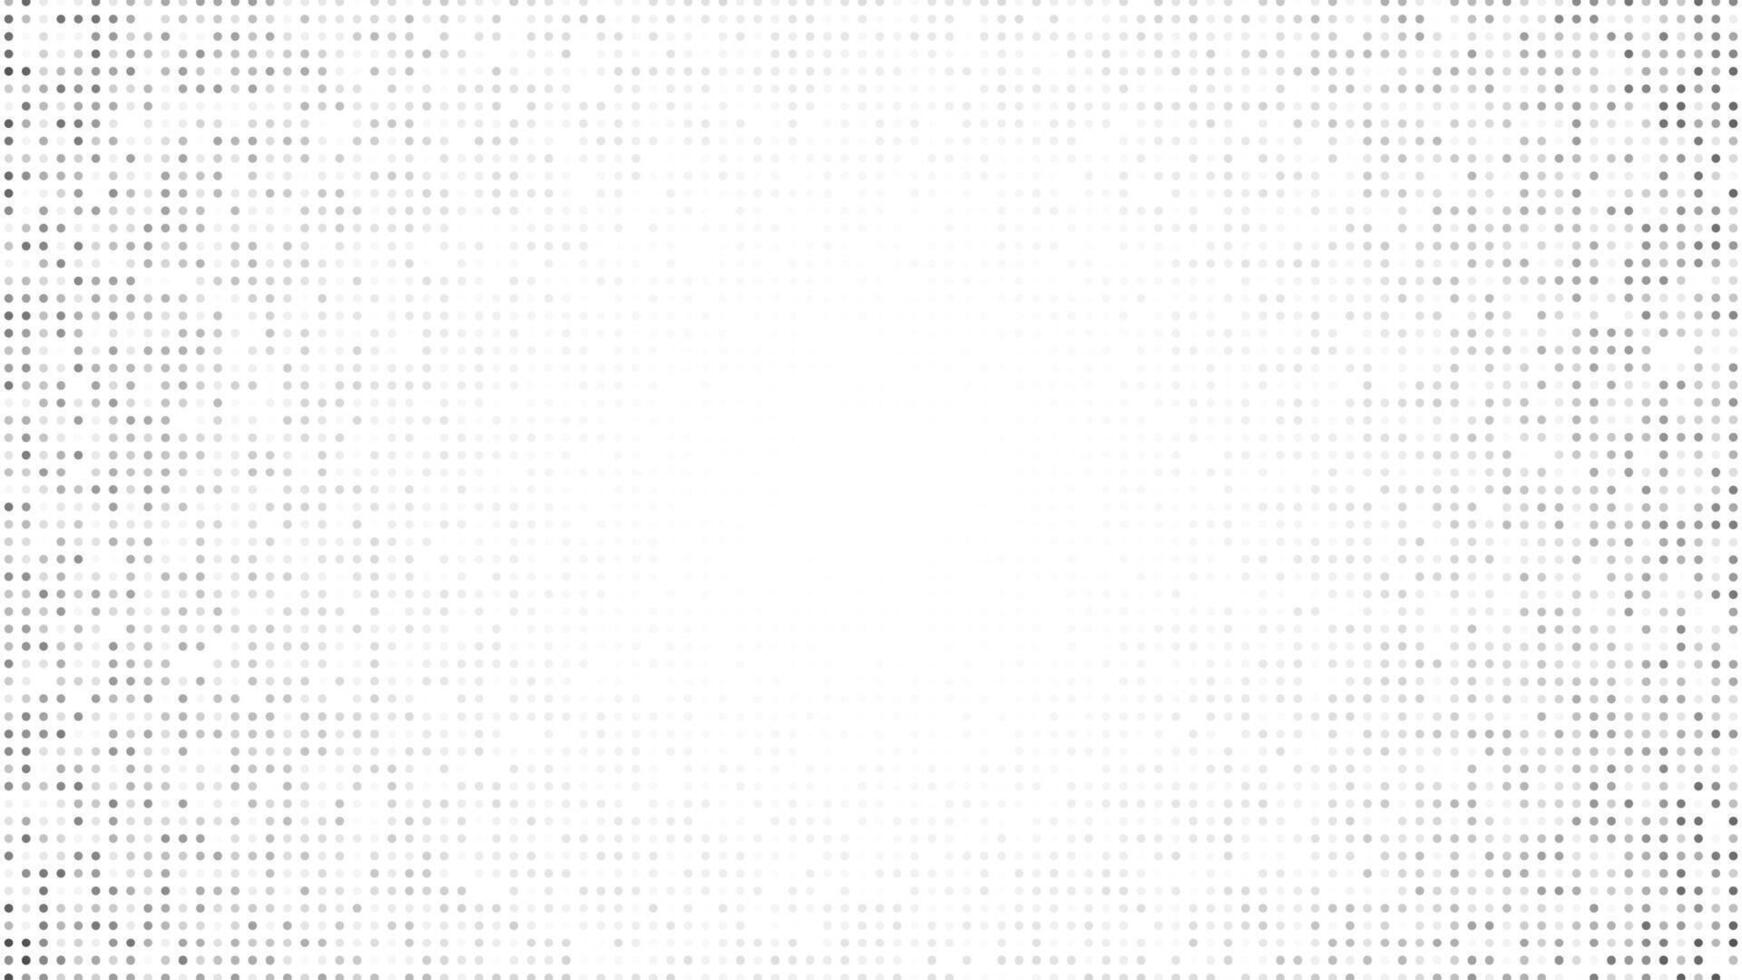 Monochrome halftone background with dots vector